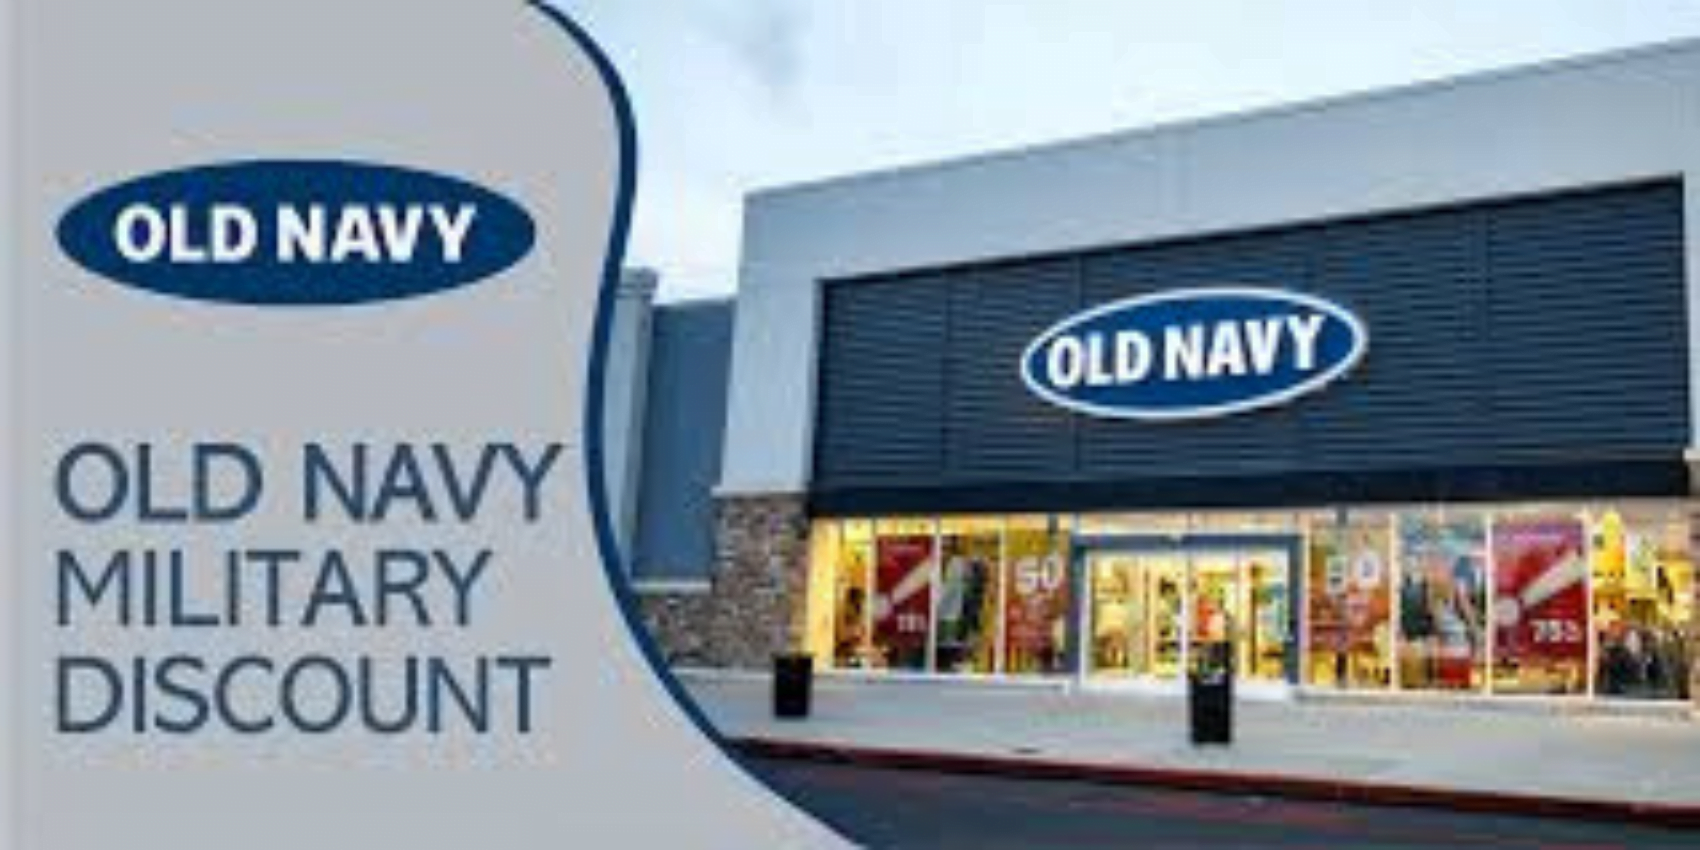 What Is Special About Old Navy